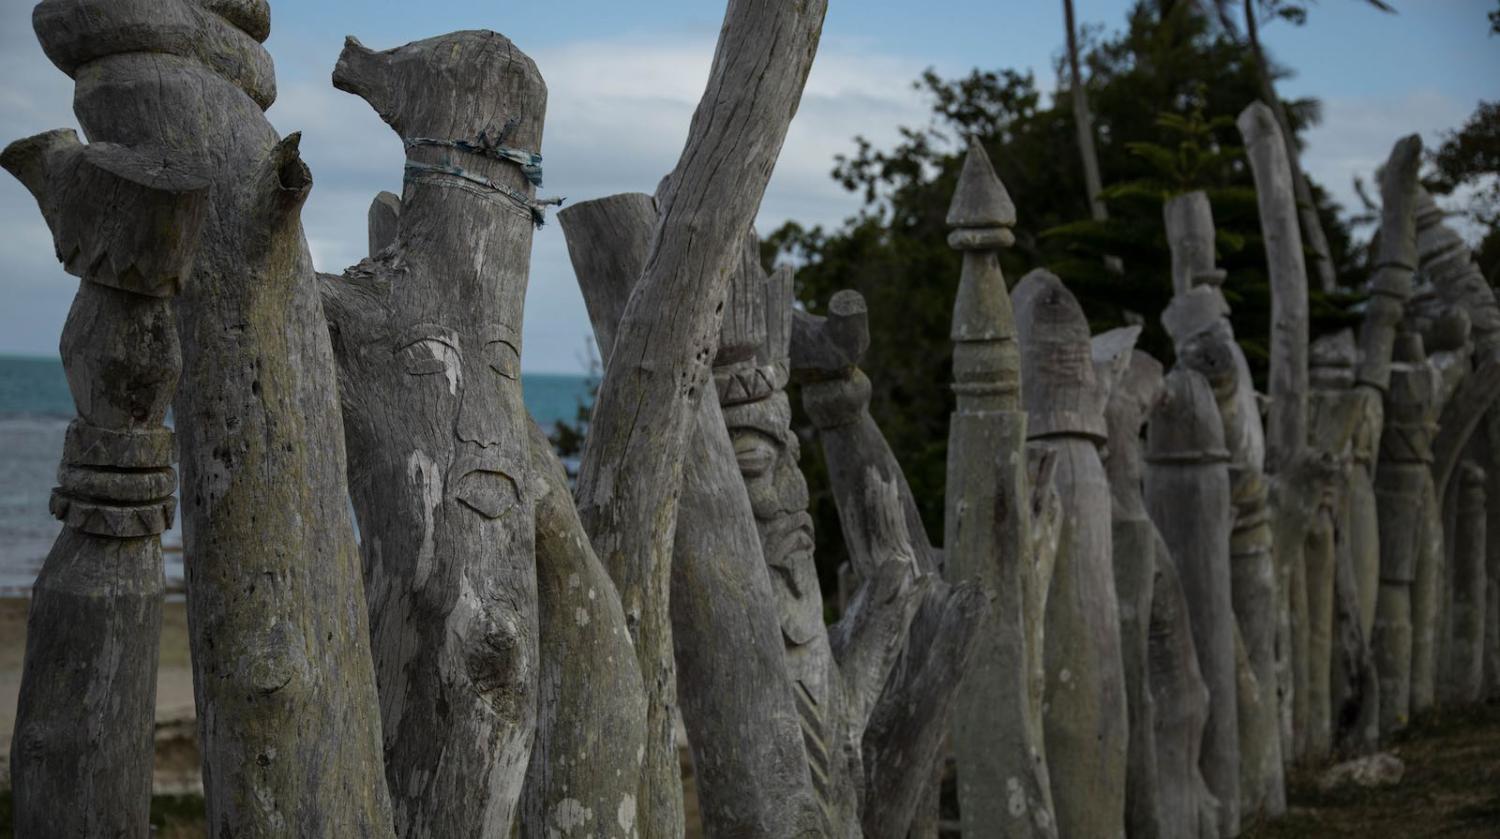 Sculptures at Vao, New Caledonia (Photo: Chris Hoare/Flickr)